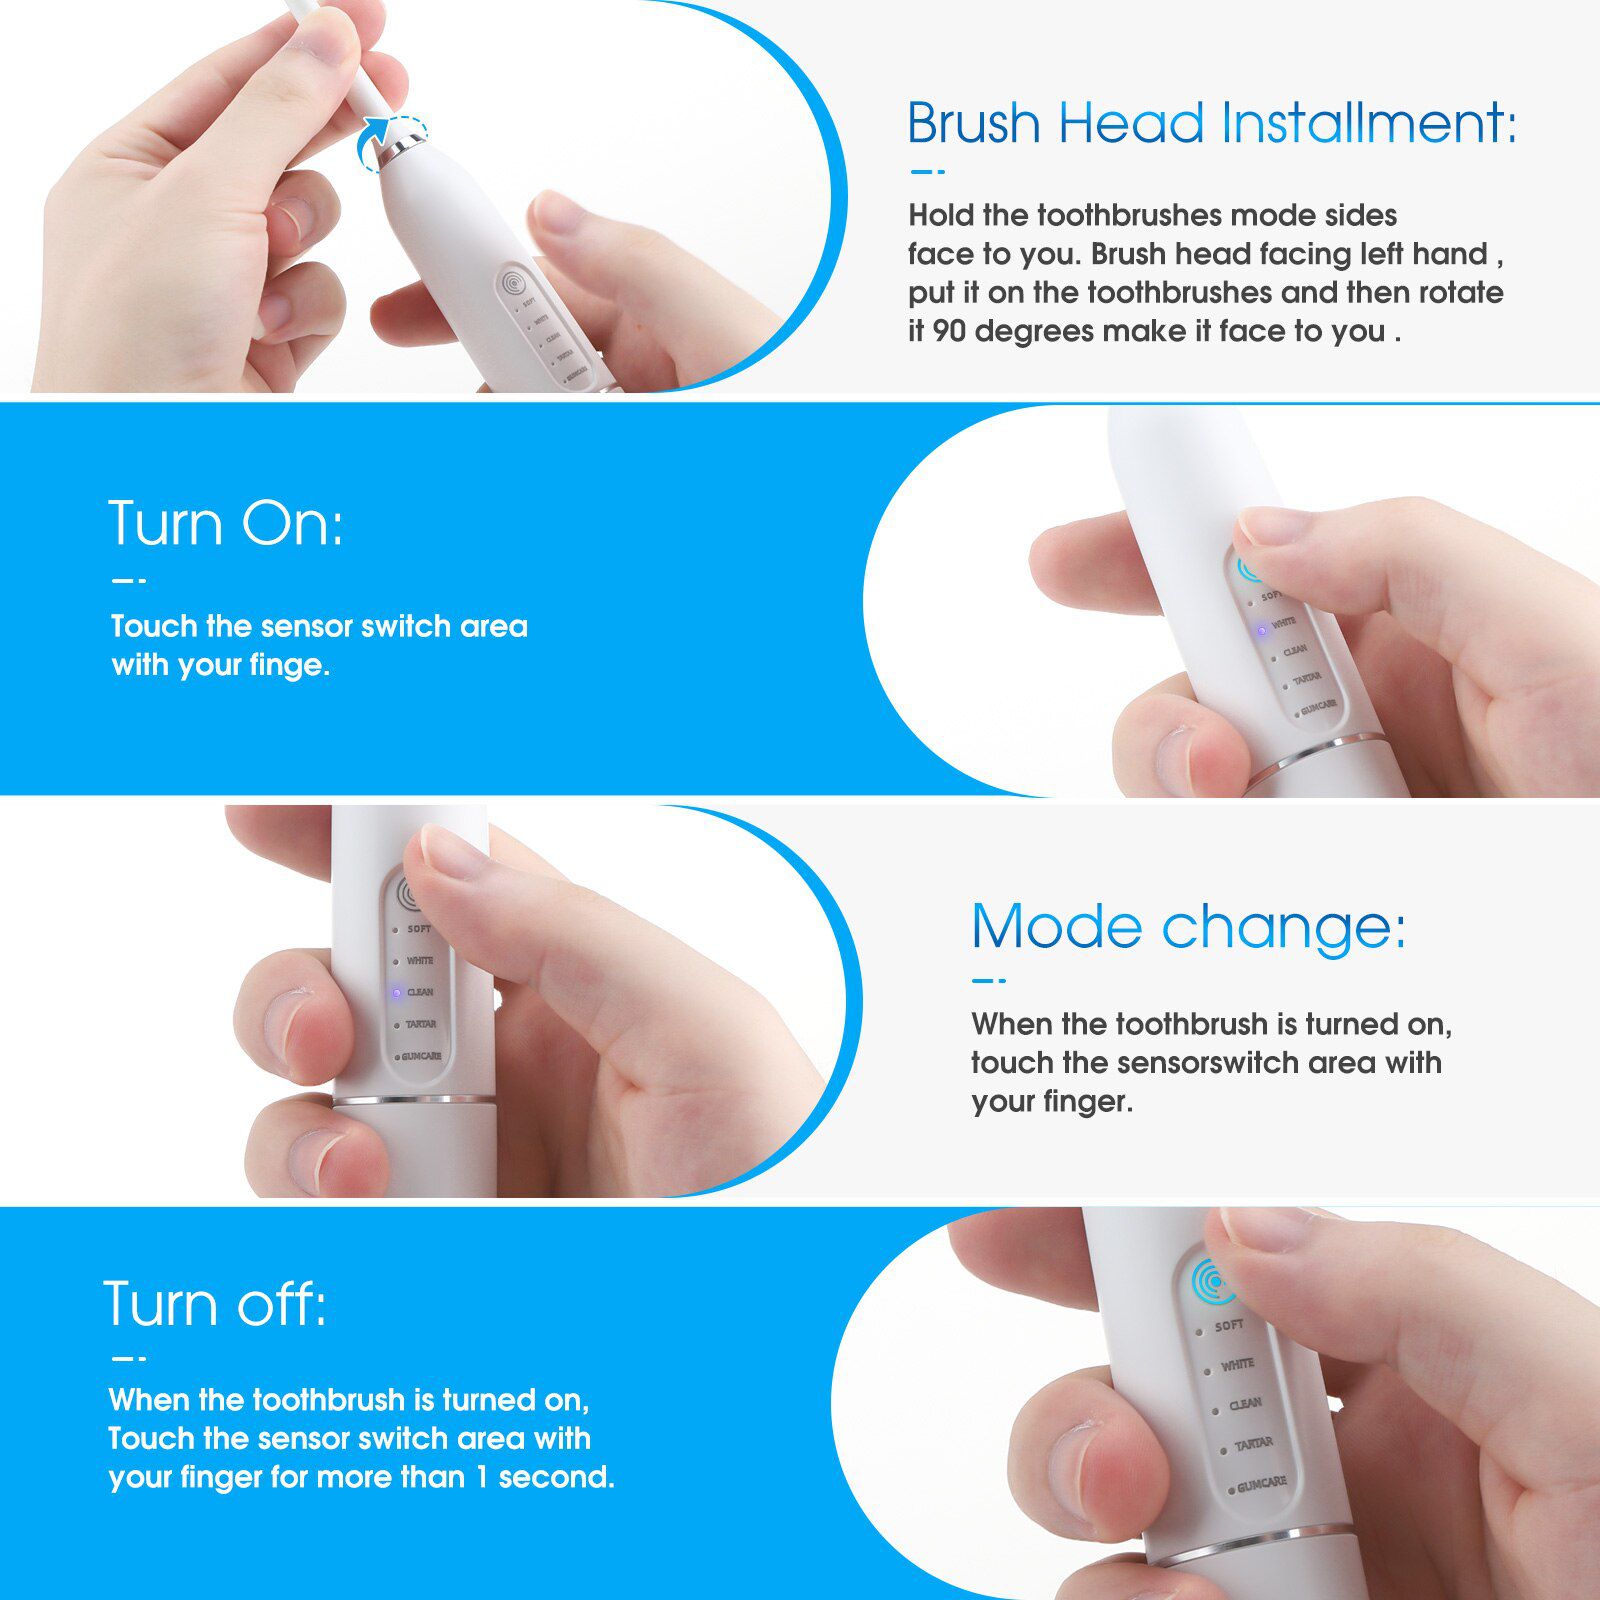 Sonic Electric Toothbrushes 